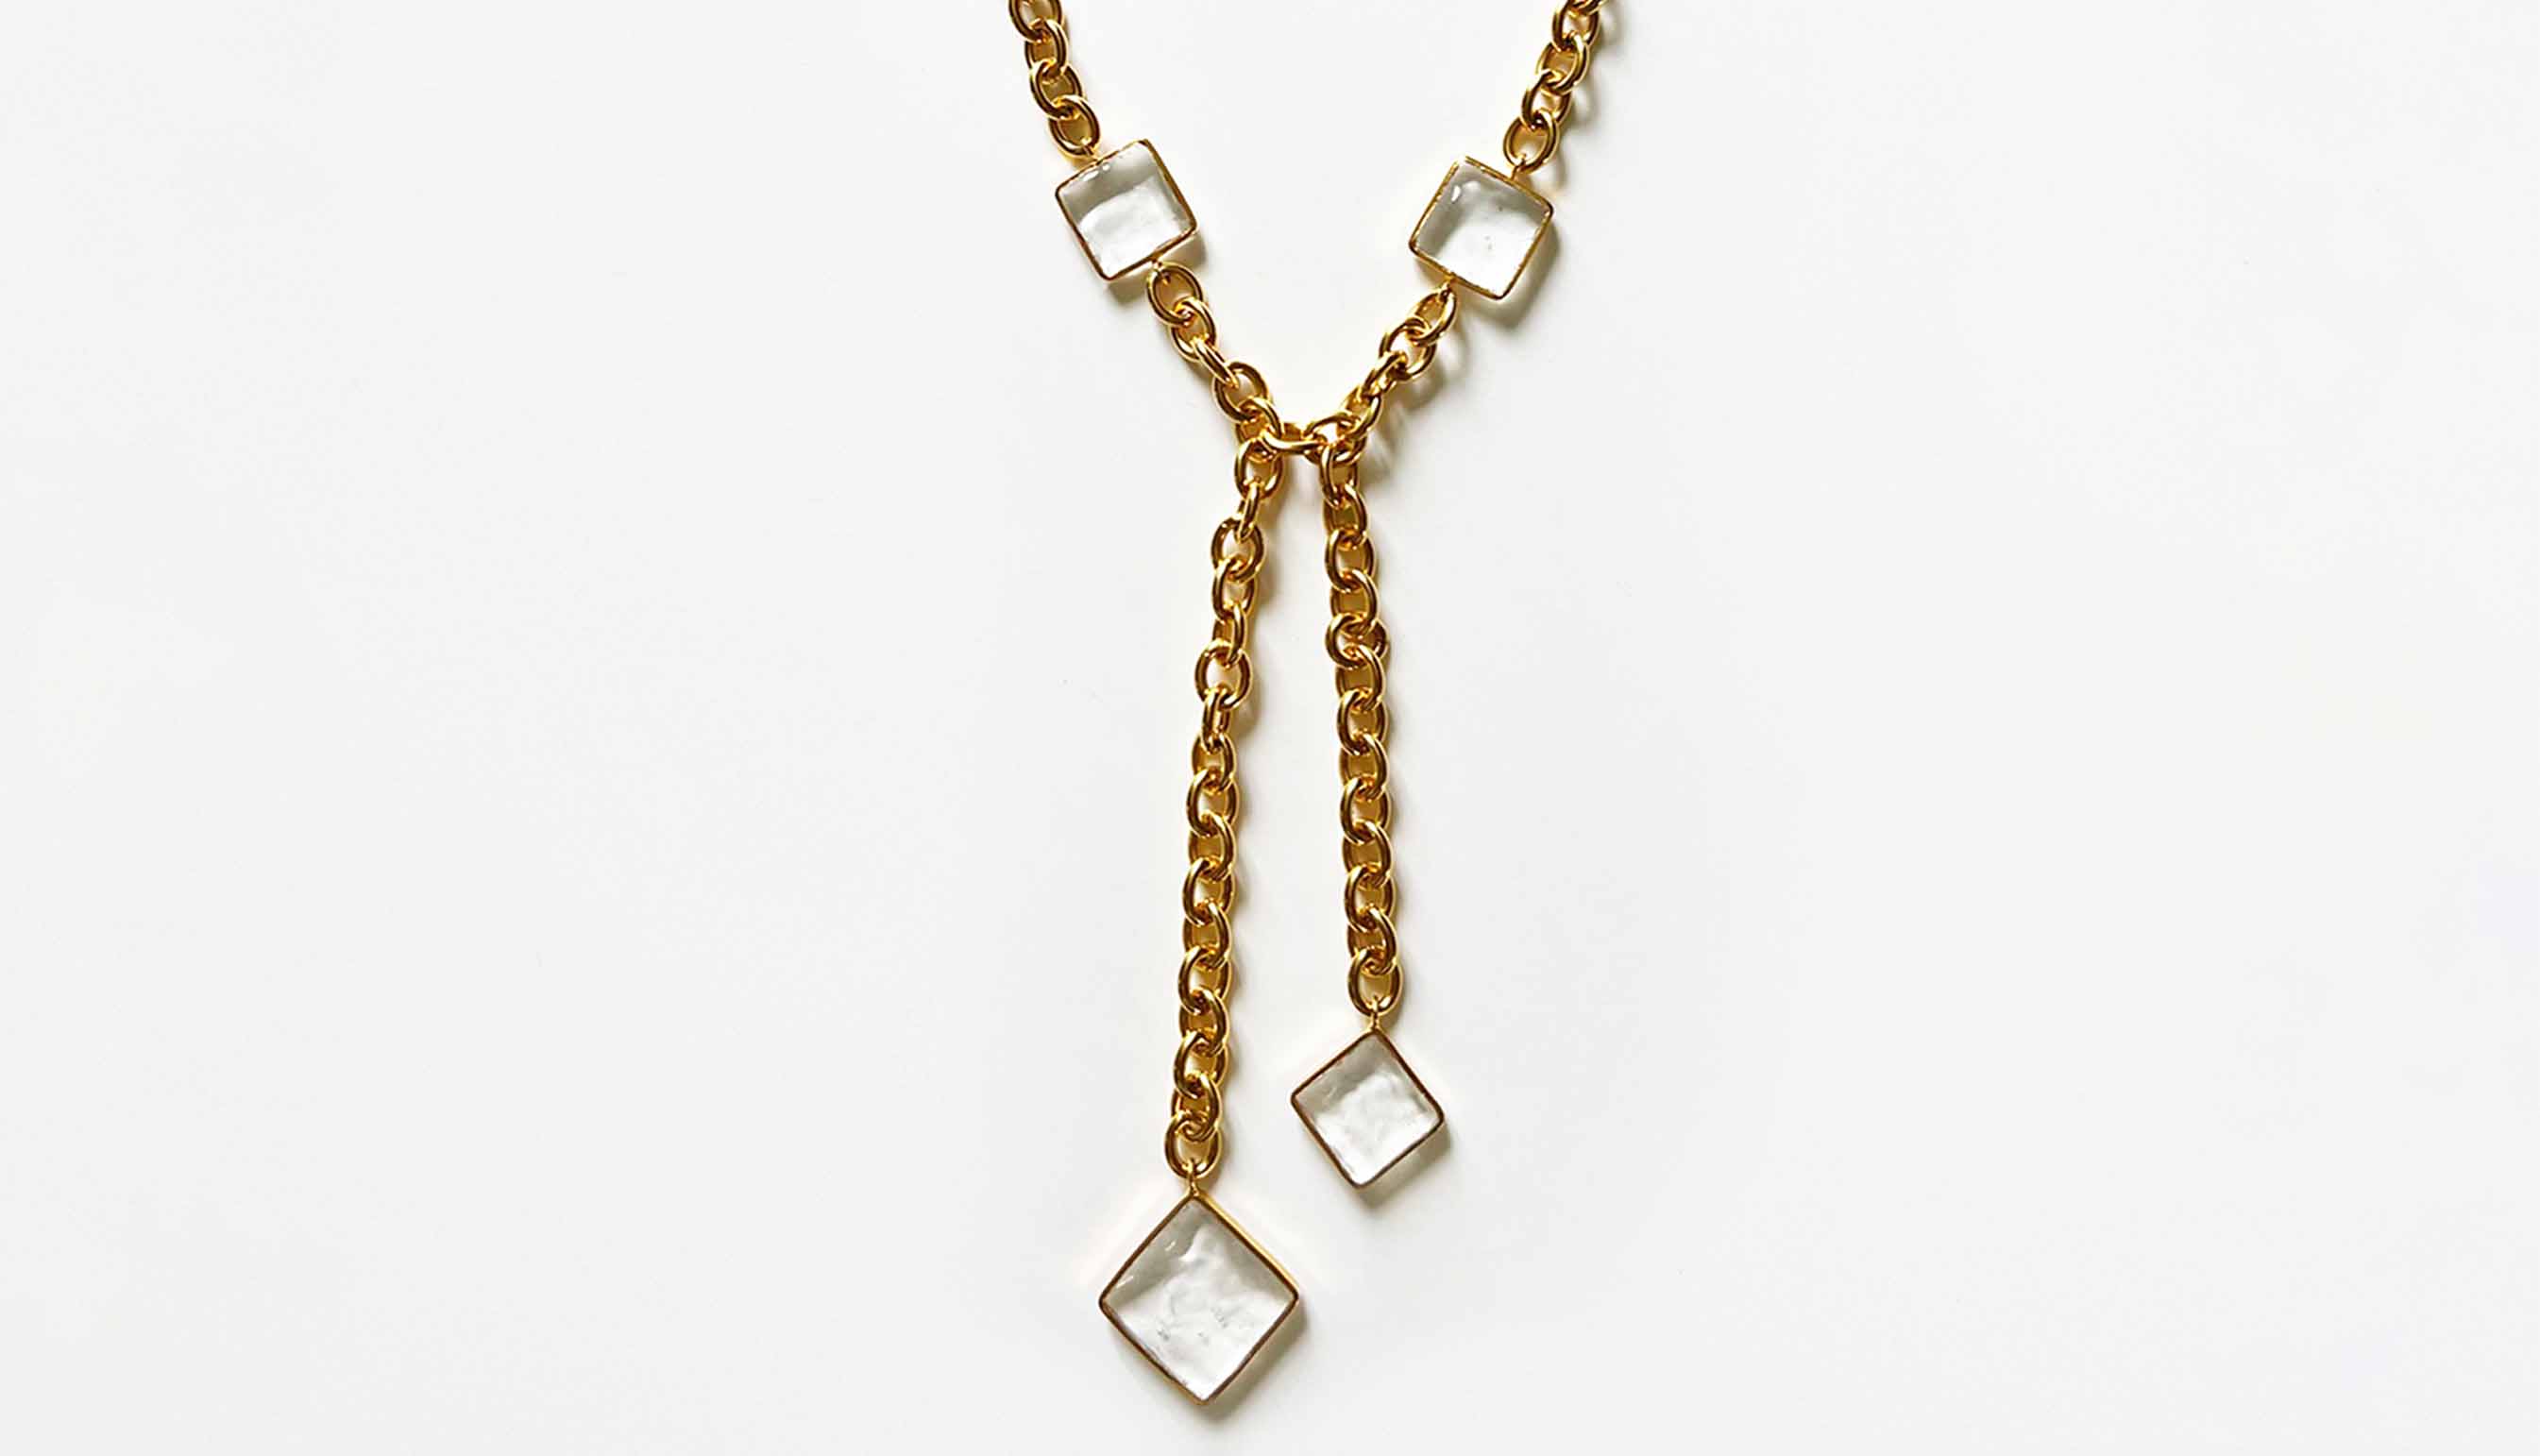 Pave & Chain Tie Necklace